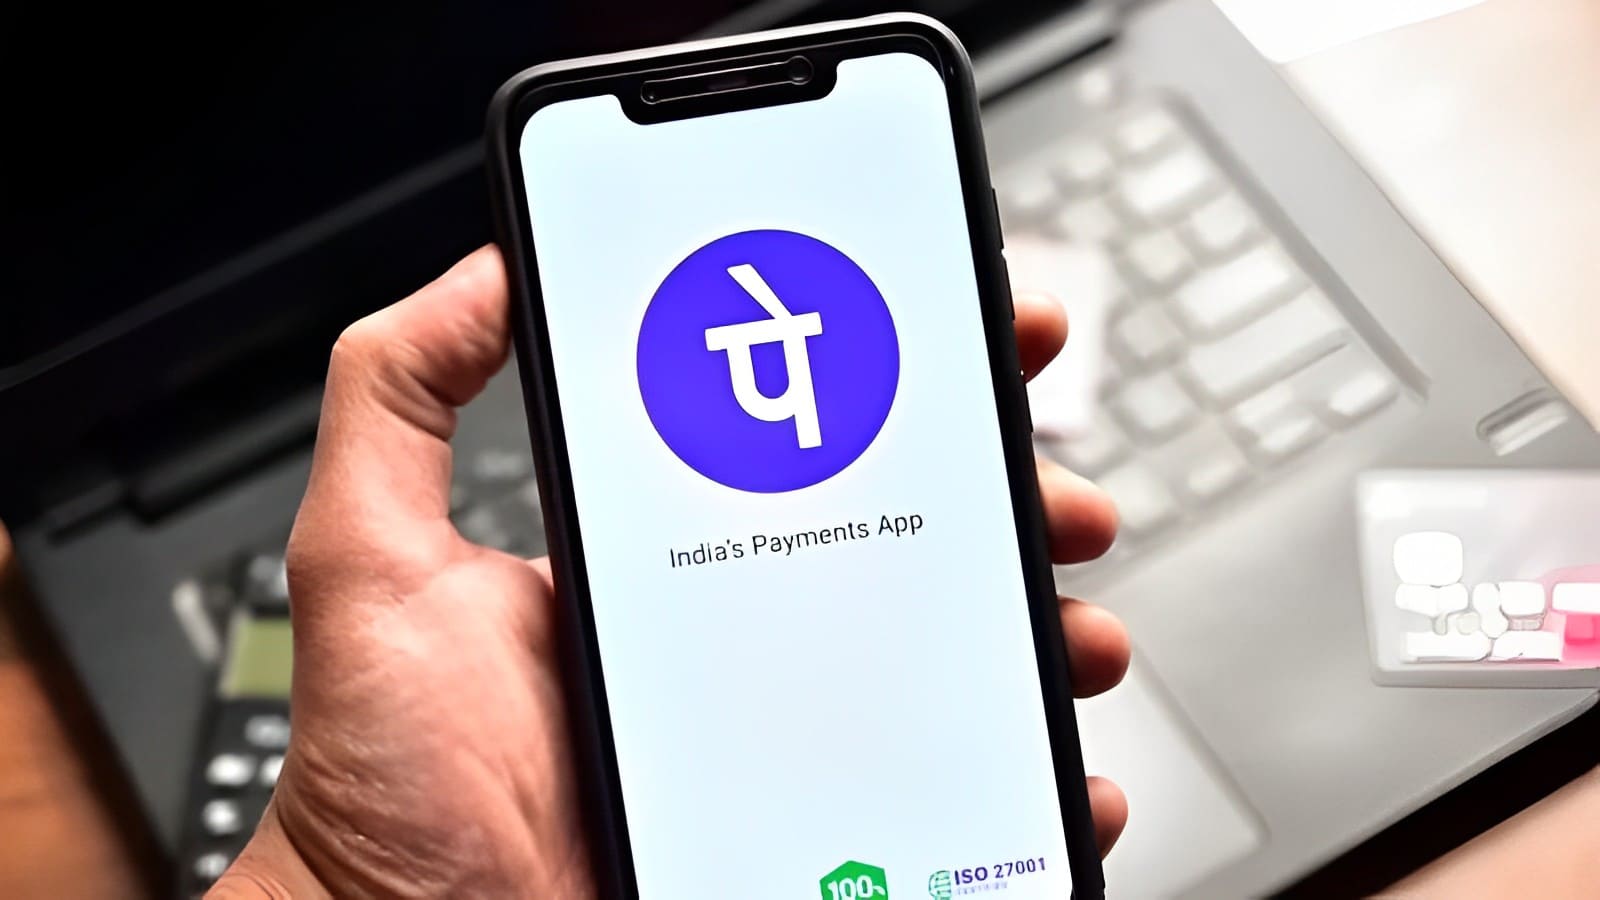 PhonePe-ZestMoney deal cancelled due to valuation differences